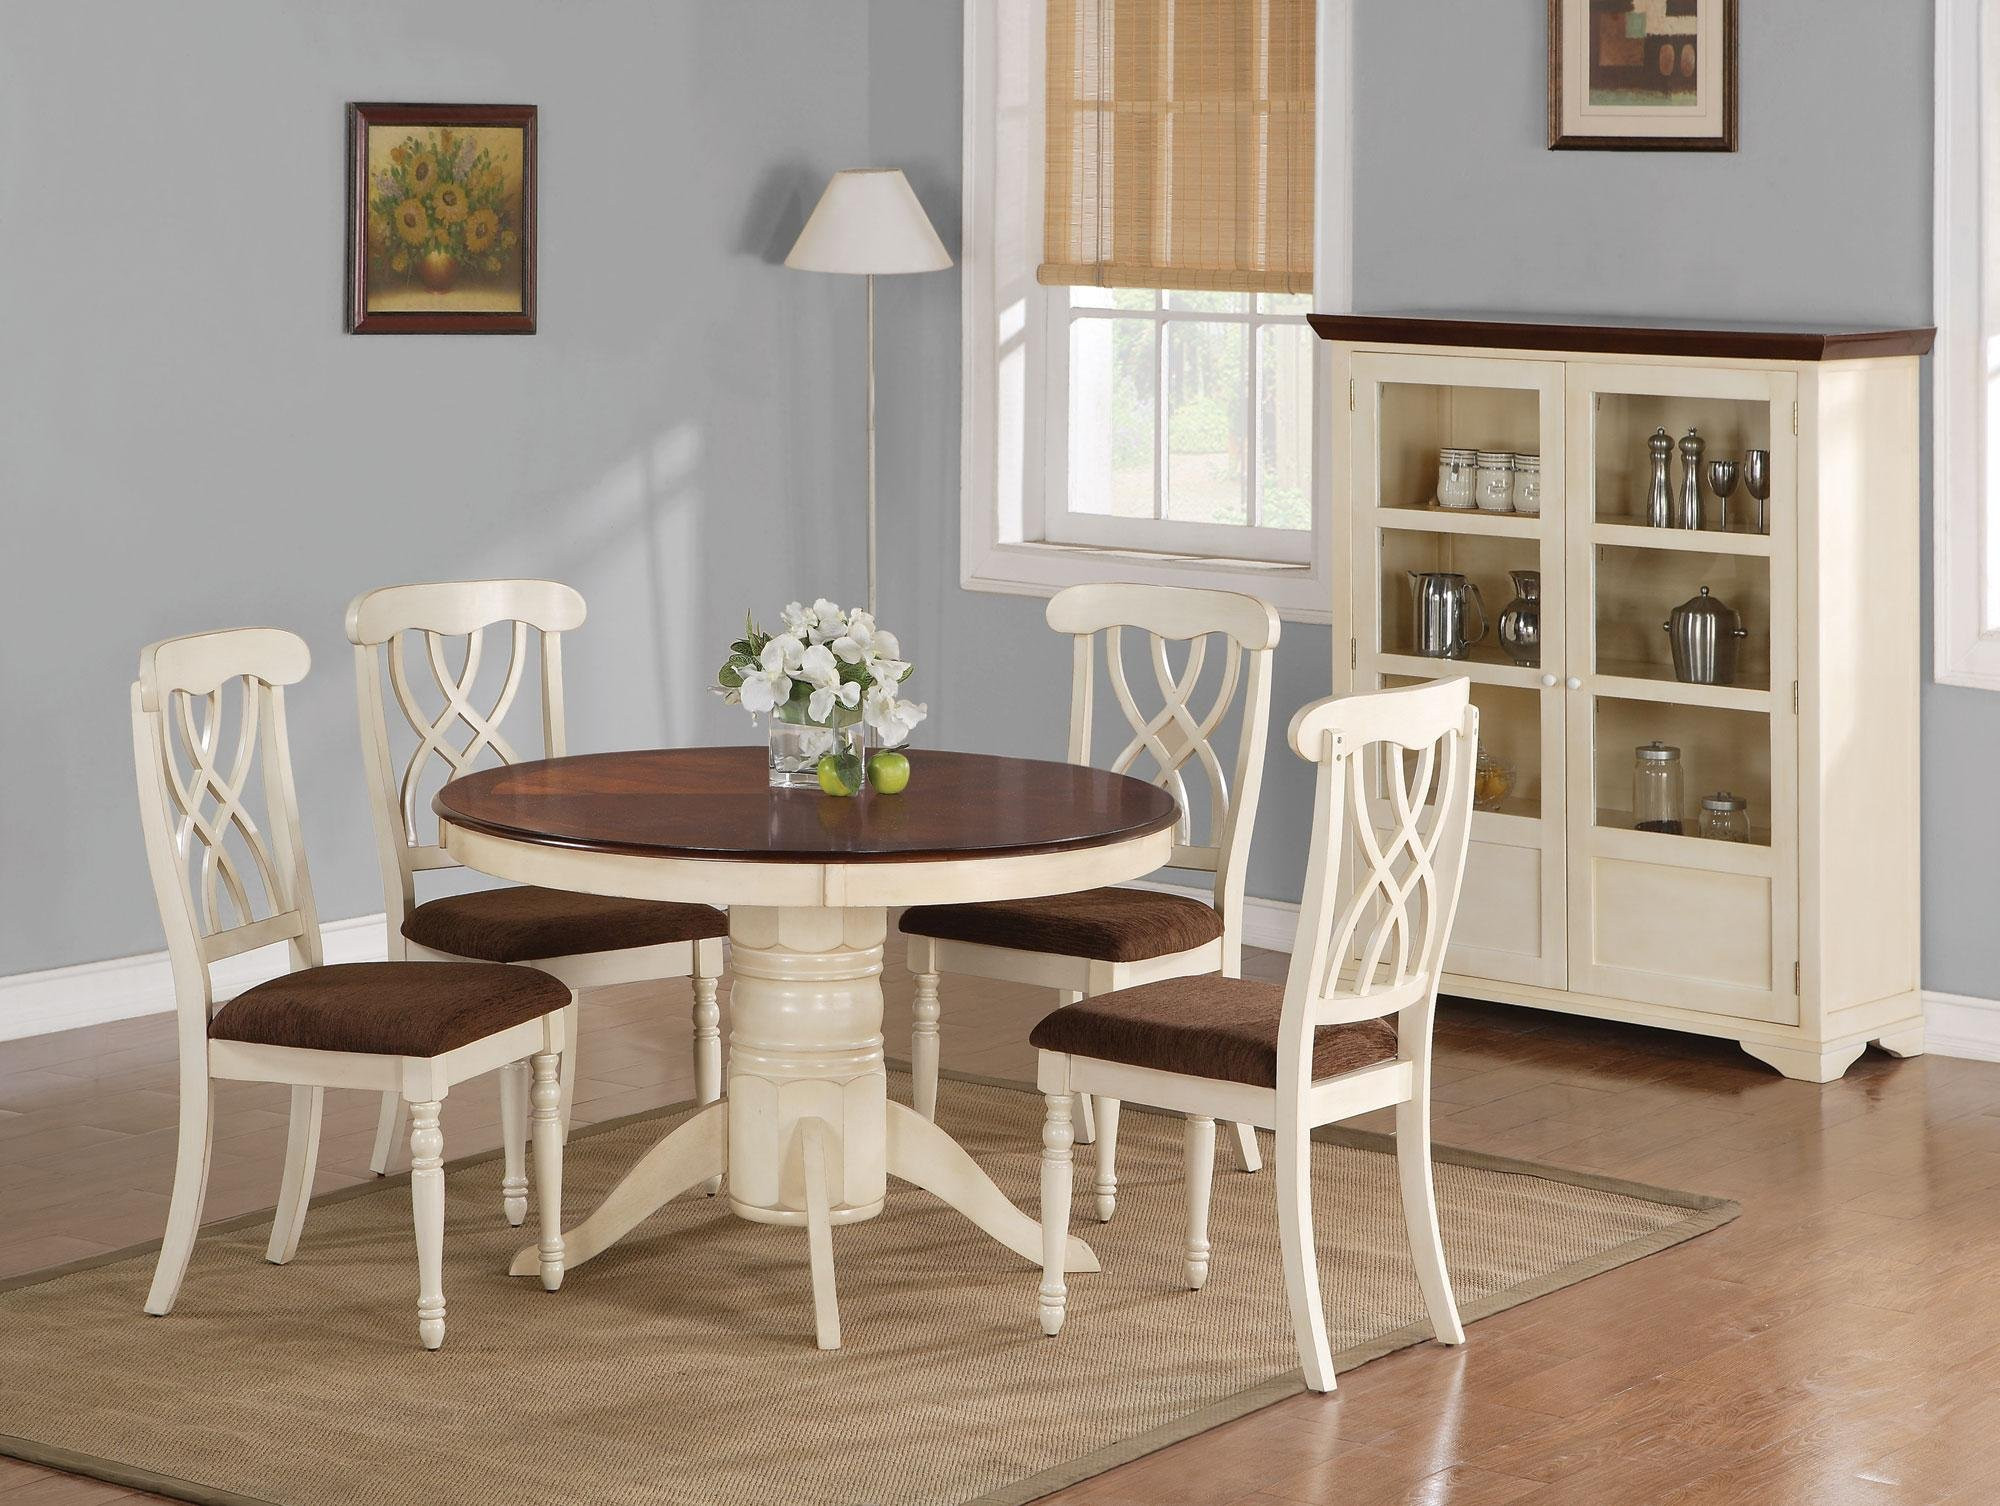 White Kitchen Table Chairs
 Beautiful White Round Kitchen Table and Chairs